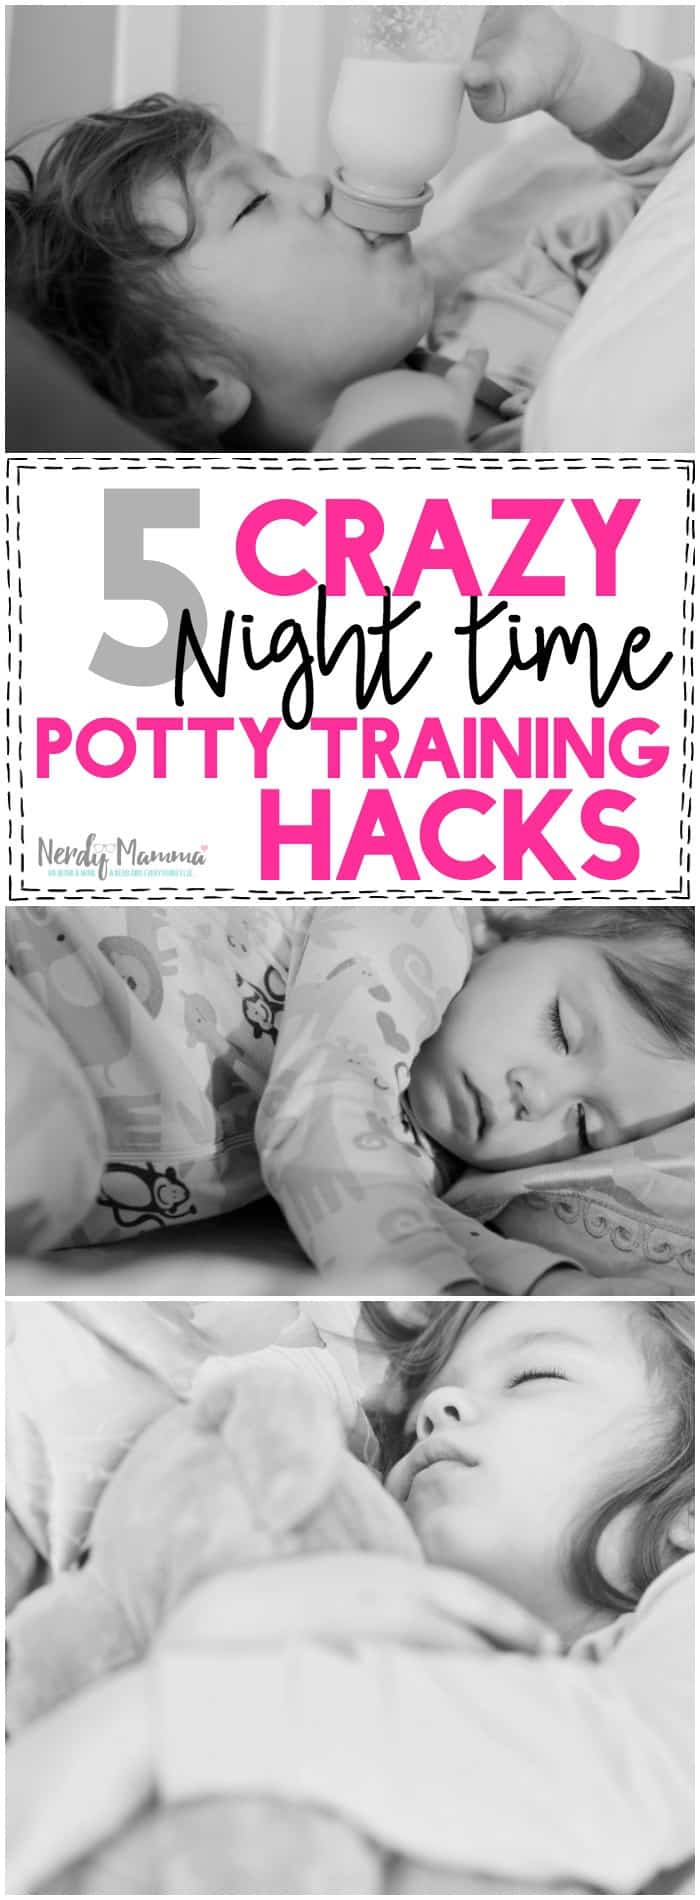 Oh man! This mom totally wins the Ms. Potty Training Mom of the Year Award! Two at once! I can't believe she doesn't have more than these 5 crazy nighttime potty training hacks! LOL!